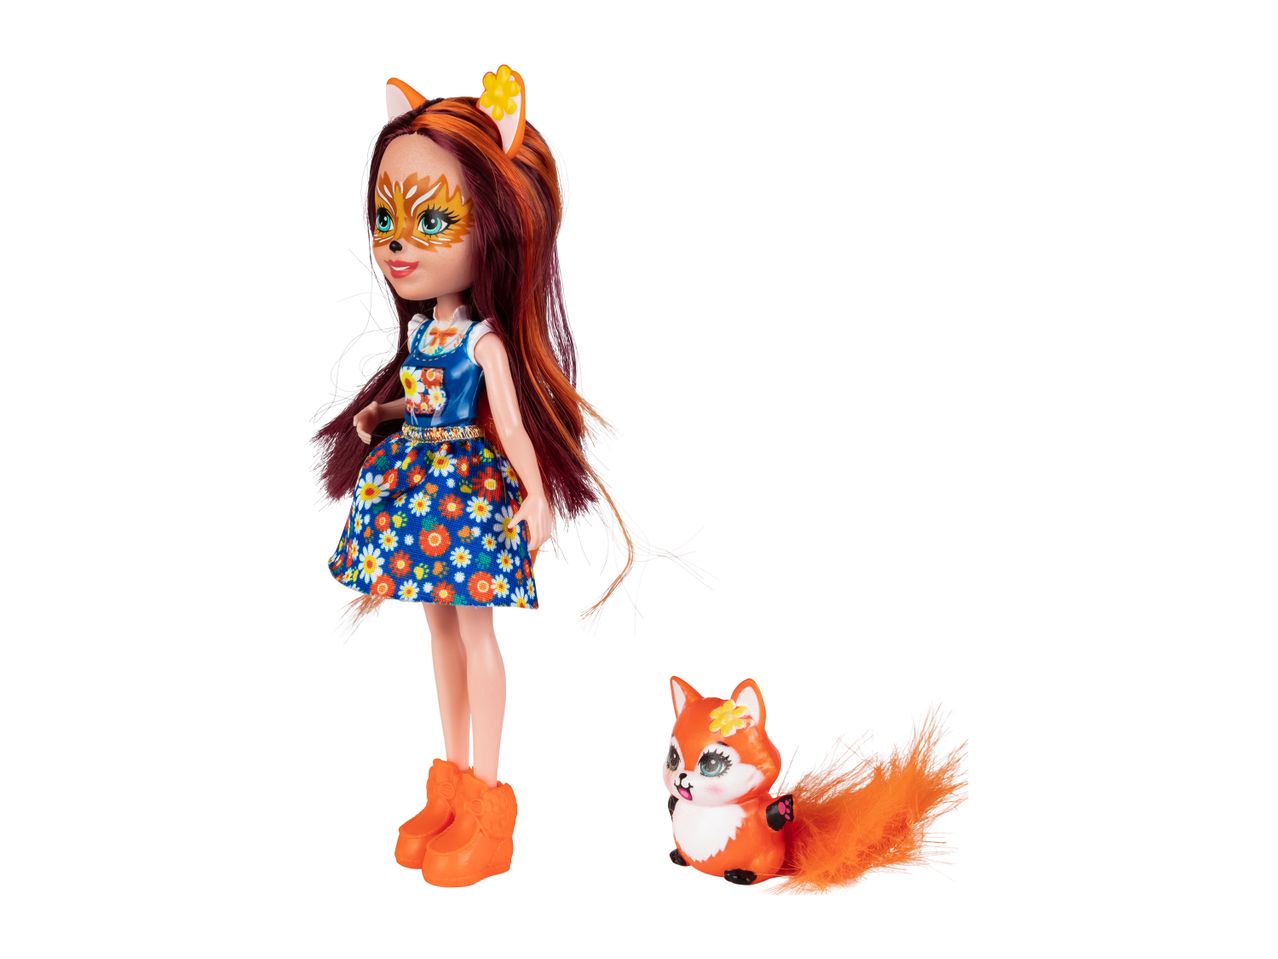 Go to full screen view: Enchantimals Doll - Image 16